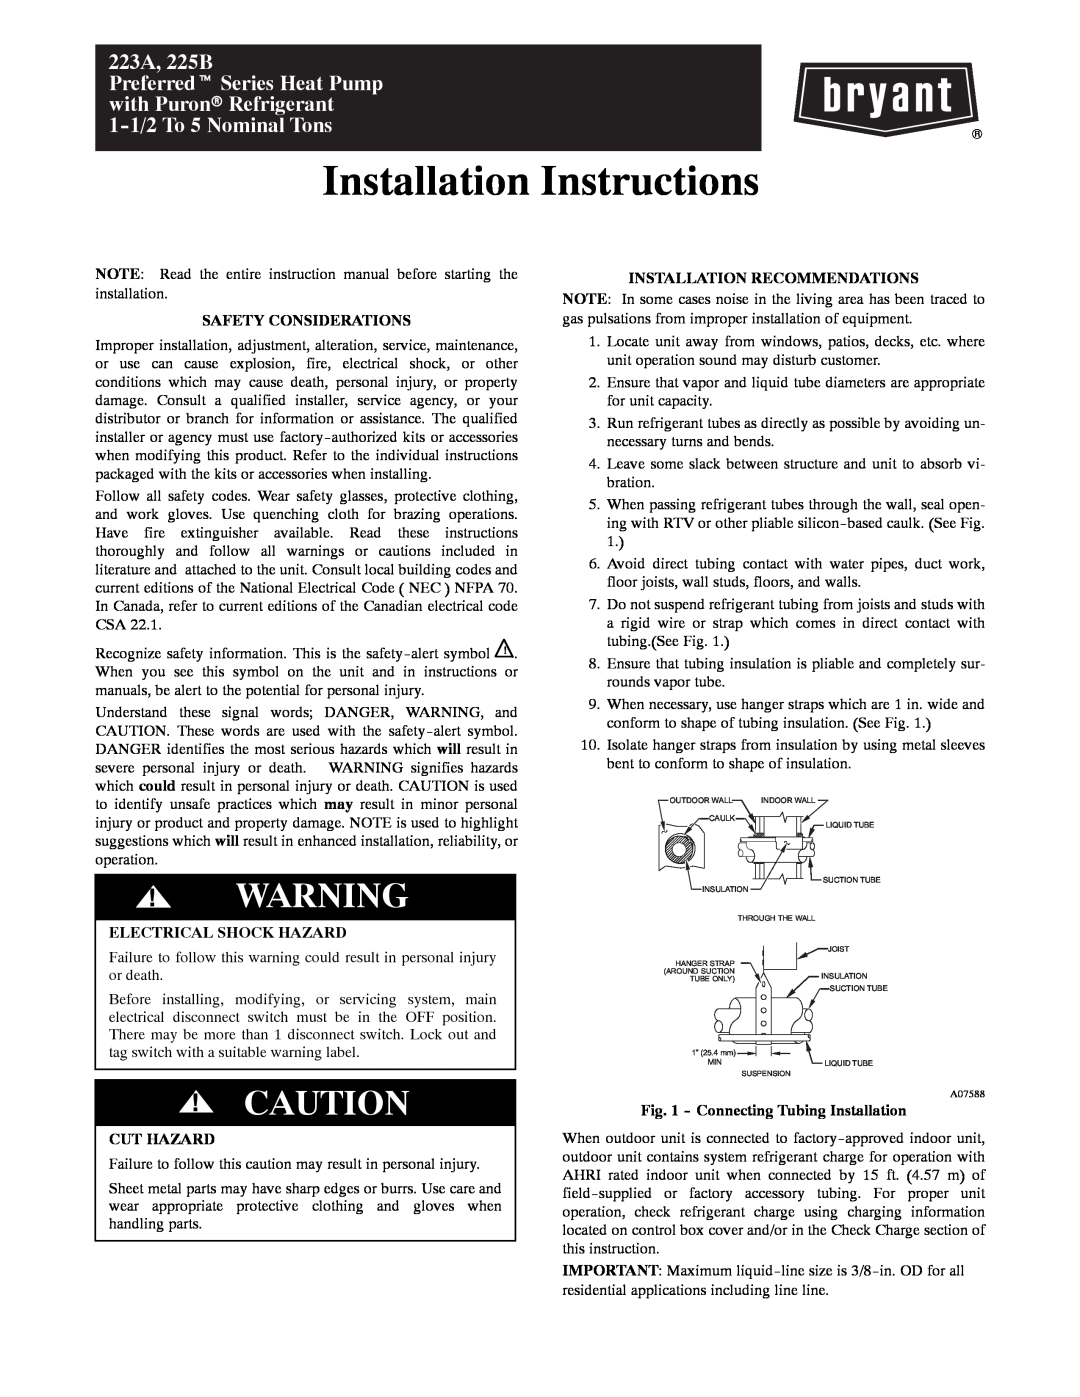 Bryant 223A installation instructions Safety Considerations, Electrical Shock Hazard, Installation Recommendations 